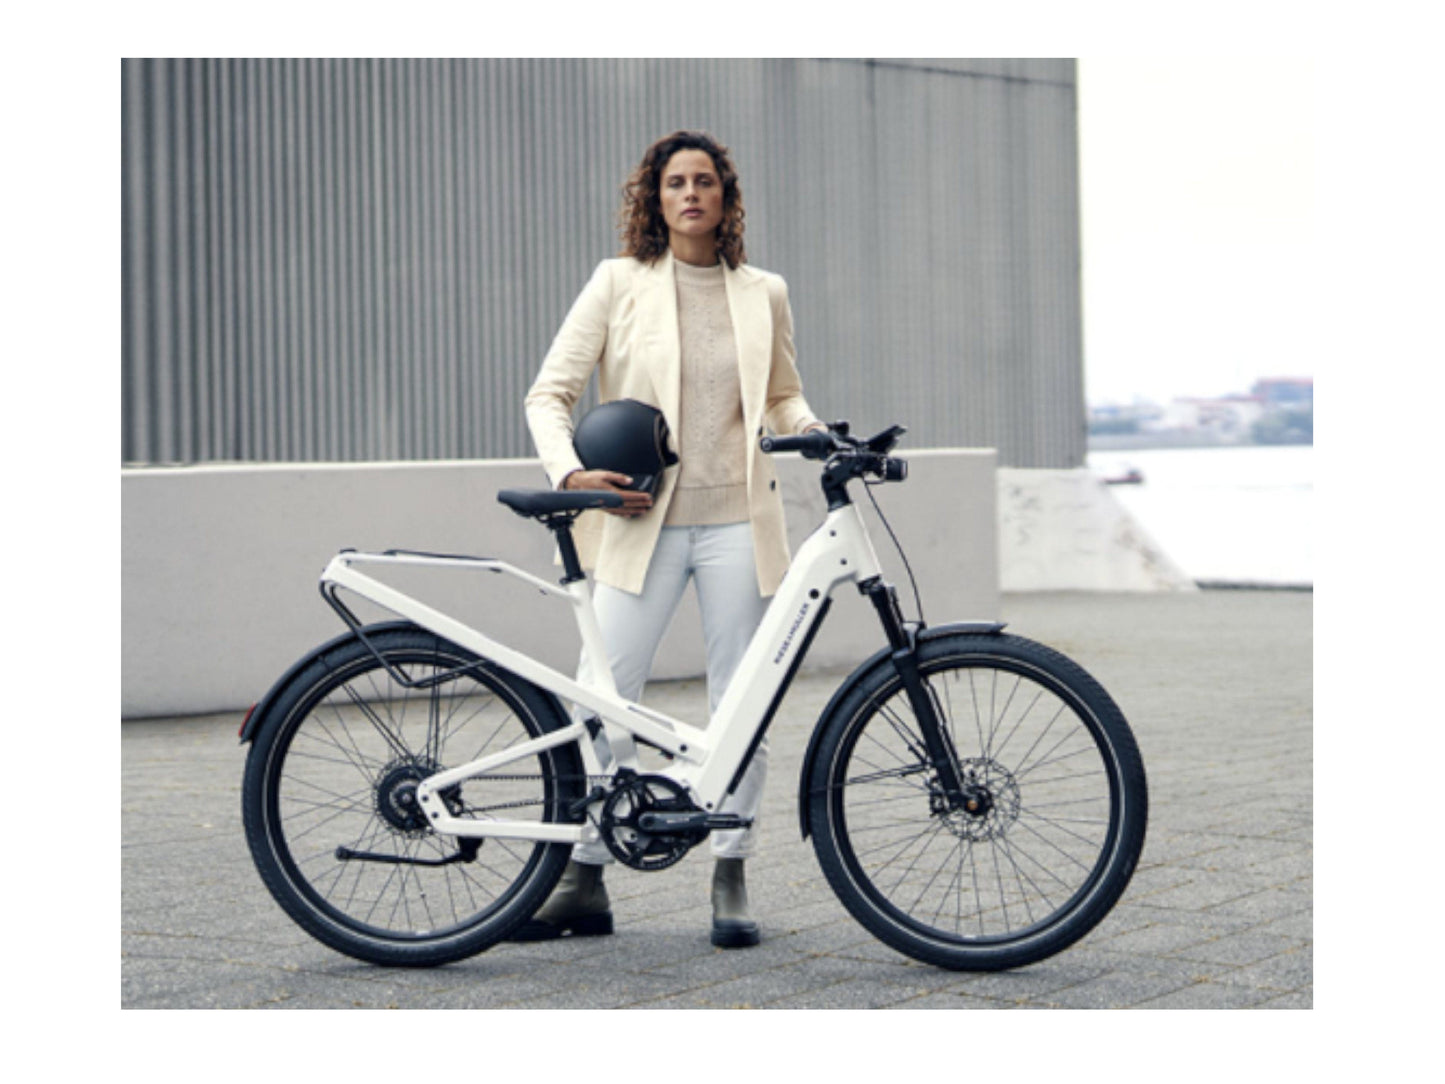 Riese and Muller Homage GT Rohloff HS ebike pearl white lady standing next to bike